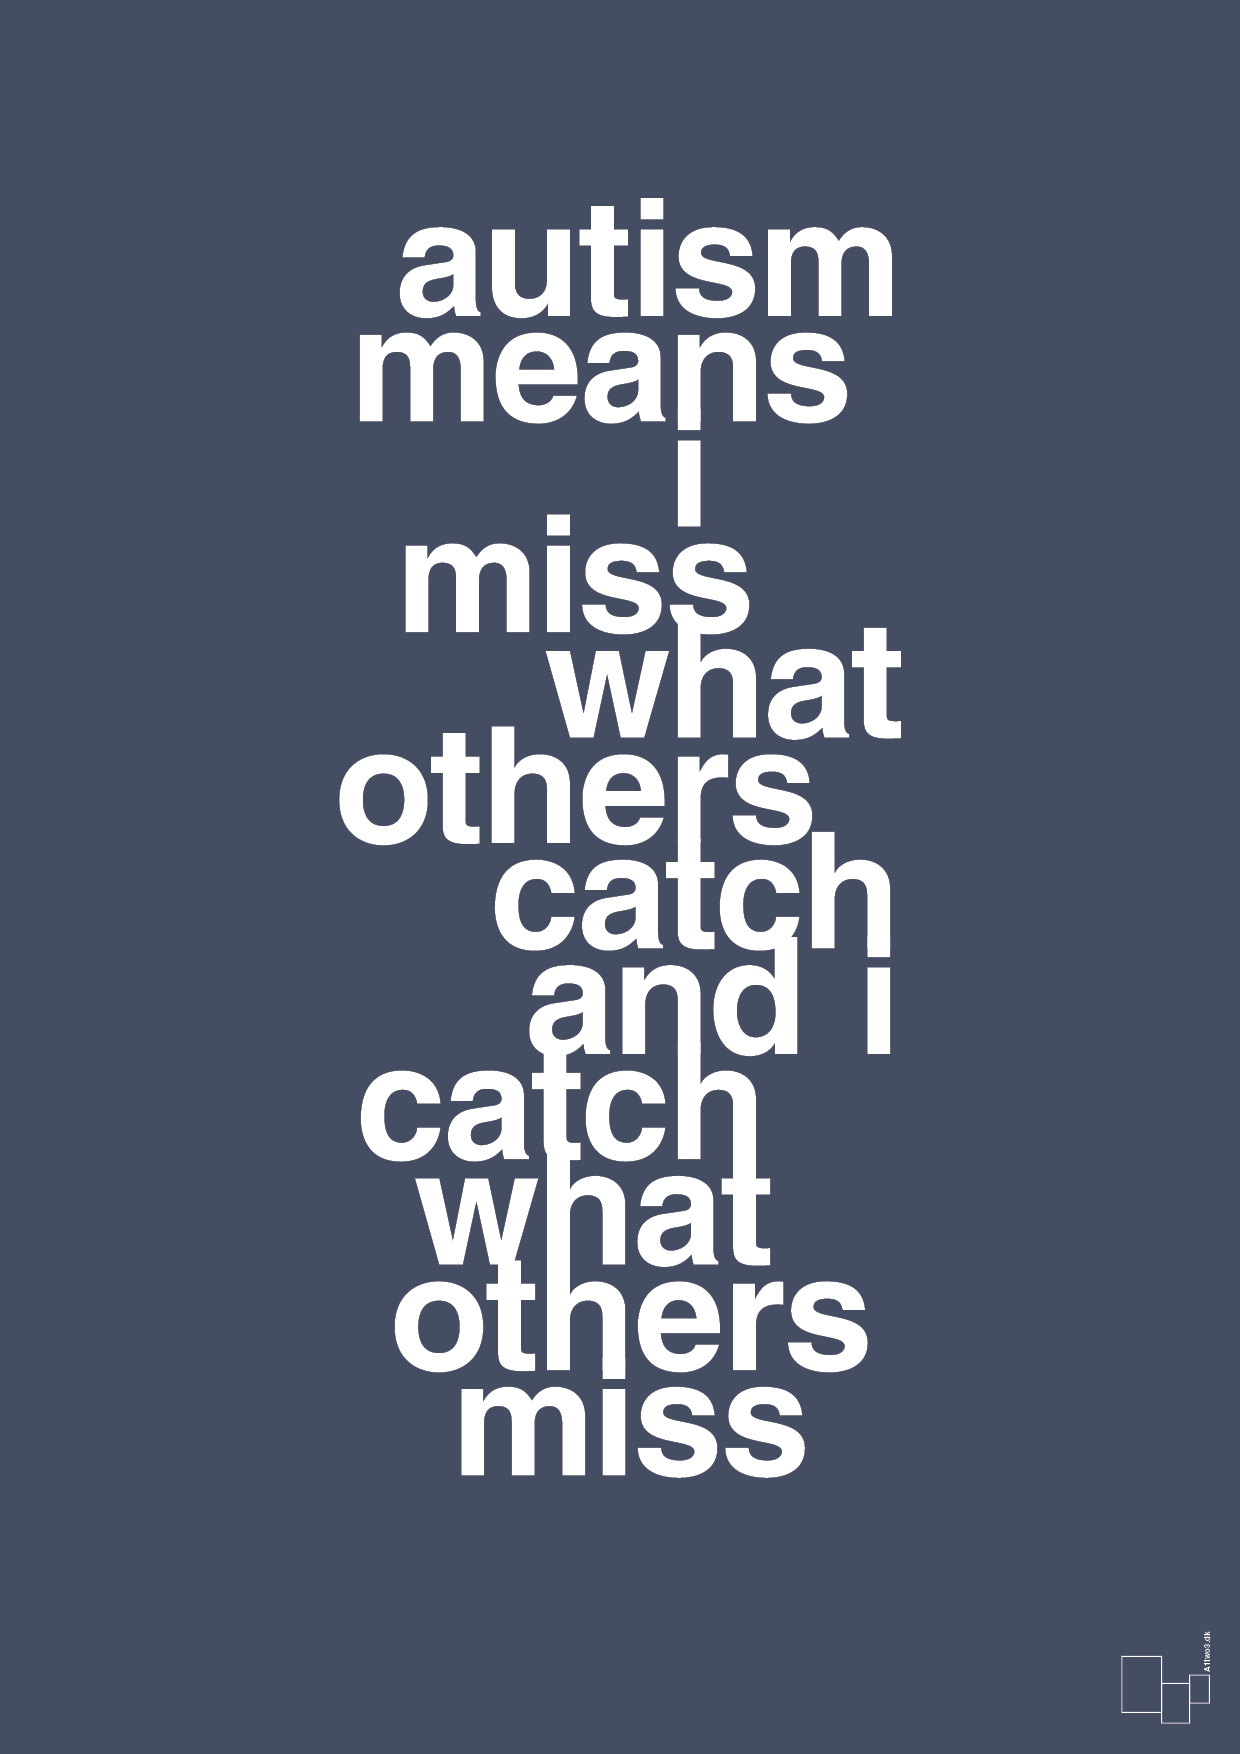 autism means i miss what others catch and i catch what others miss - Plakat med Samfund i Petrol